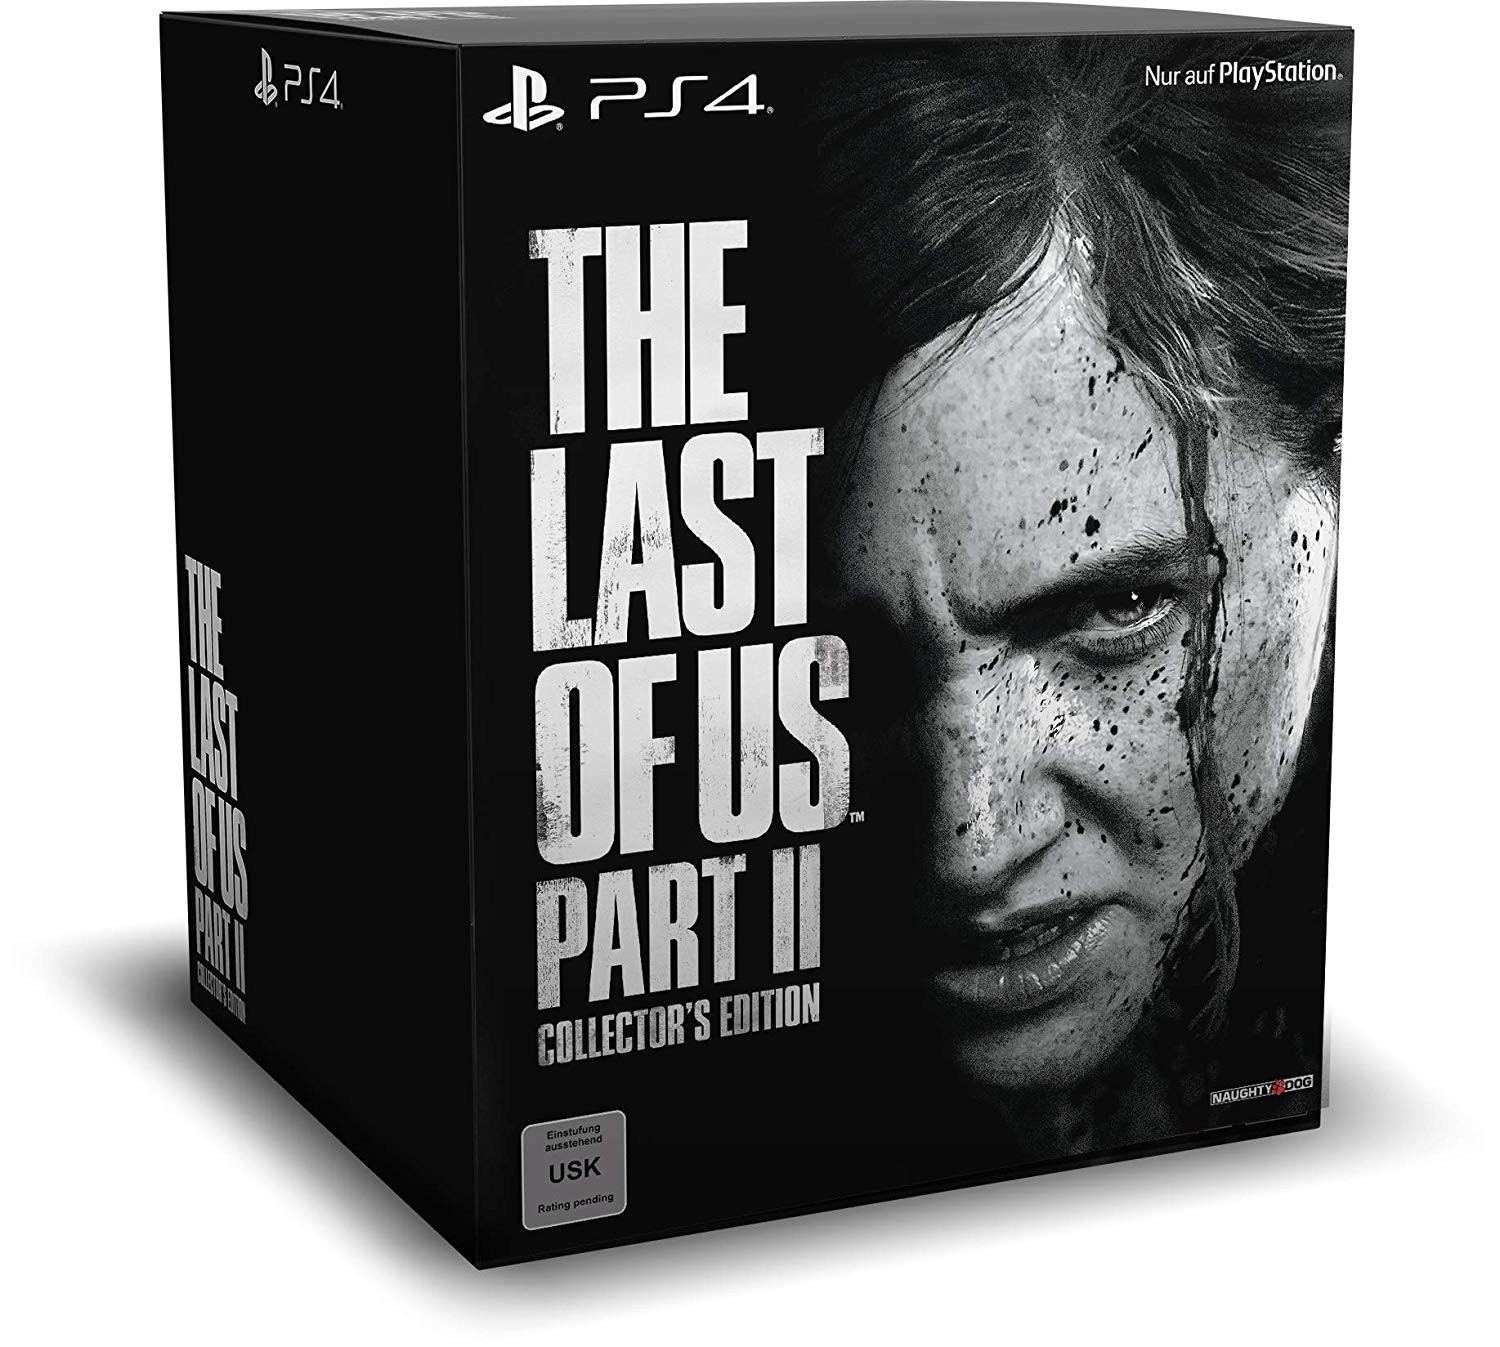 The Last of Us Part II Collectors Edition